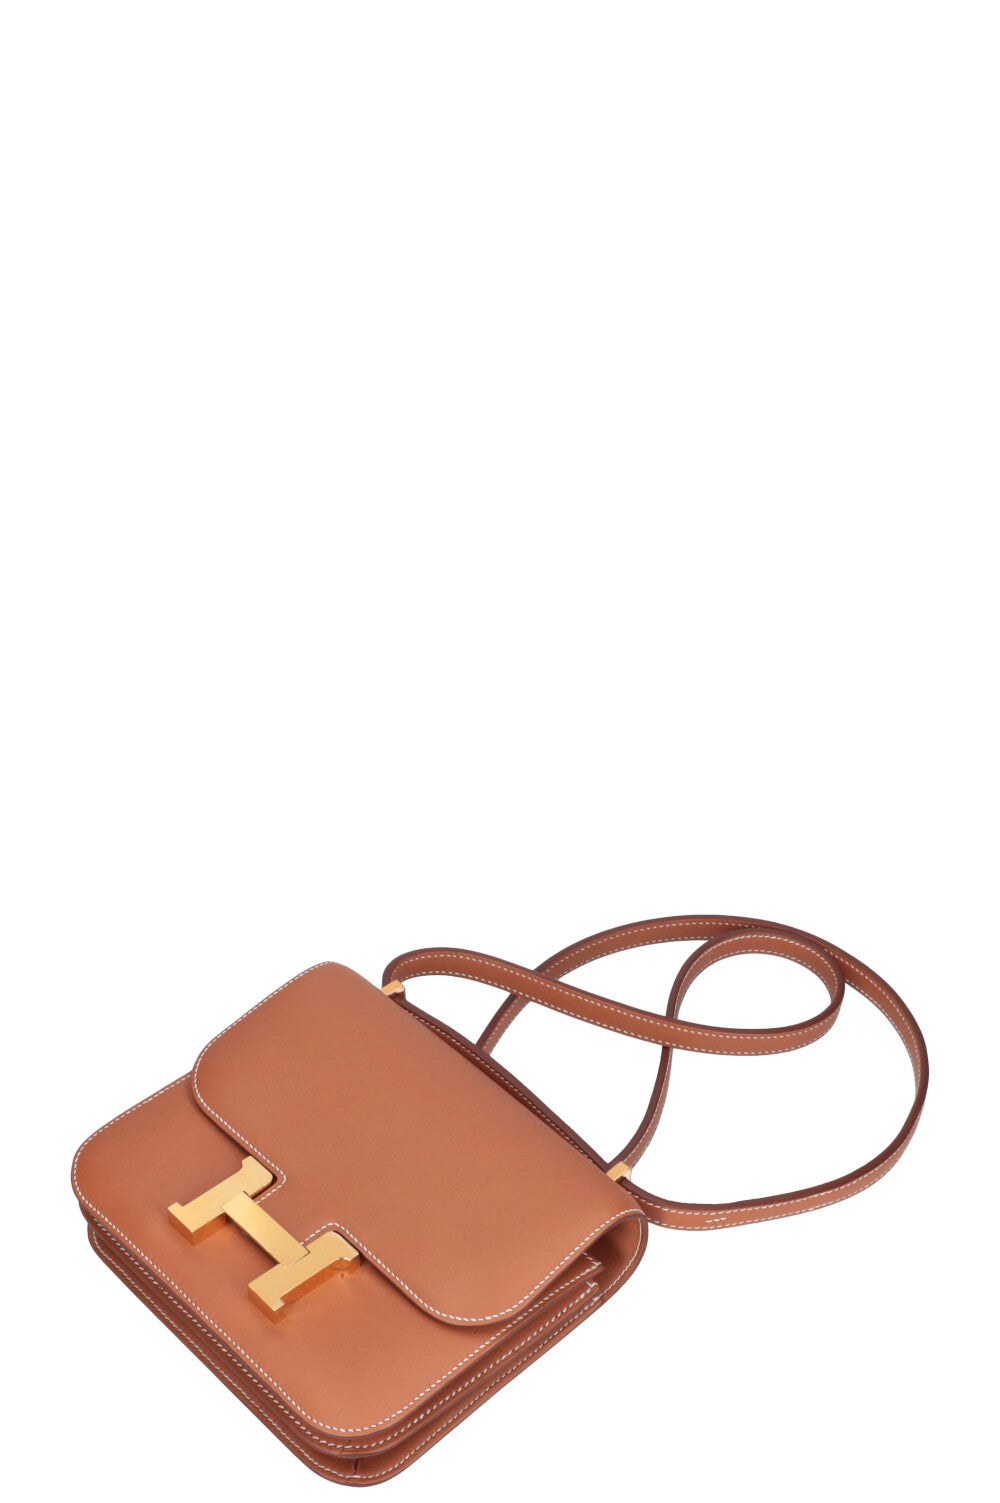 Hermes Mini Constance Bag 18cm in Paille Swift Leather with Palladium and  Lizard Hardware Hermes | TLC